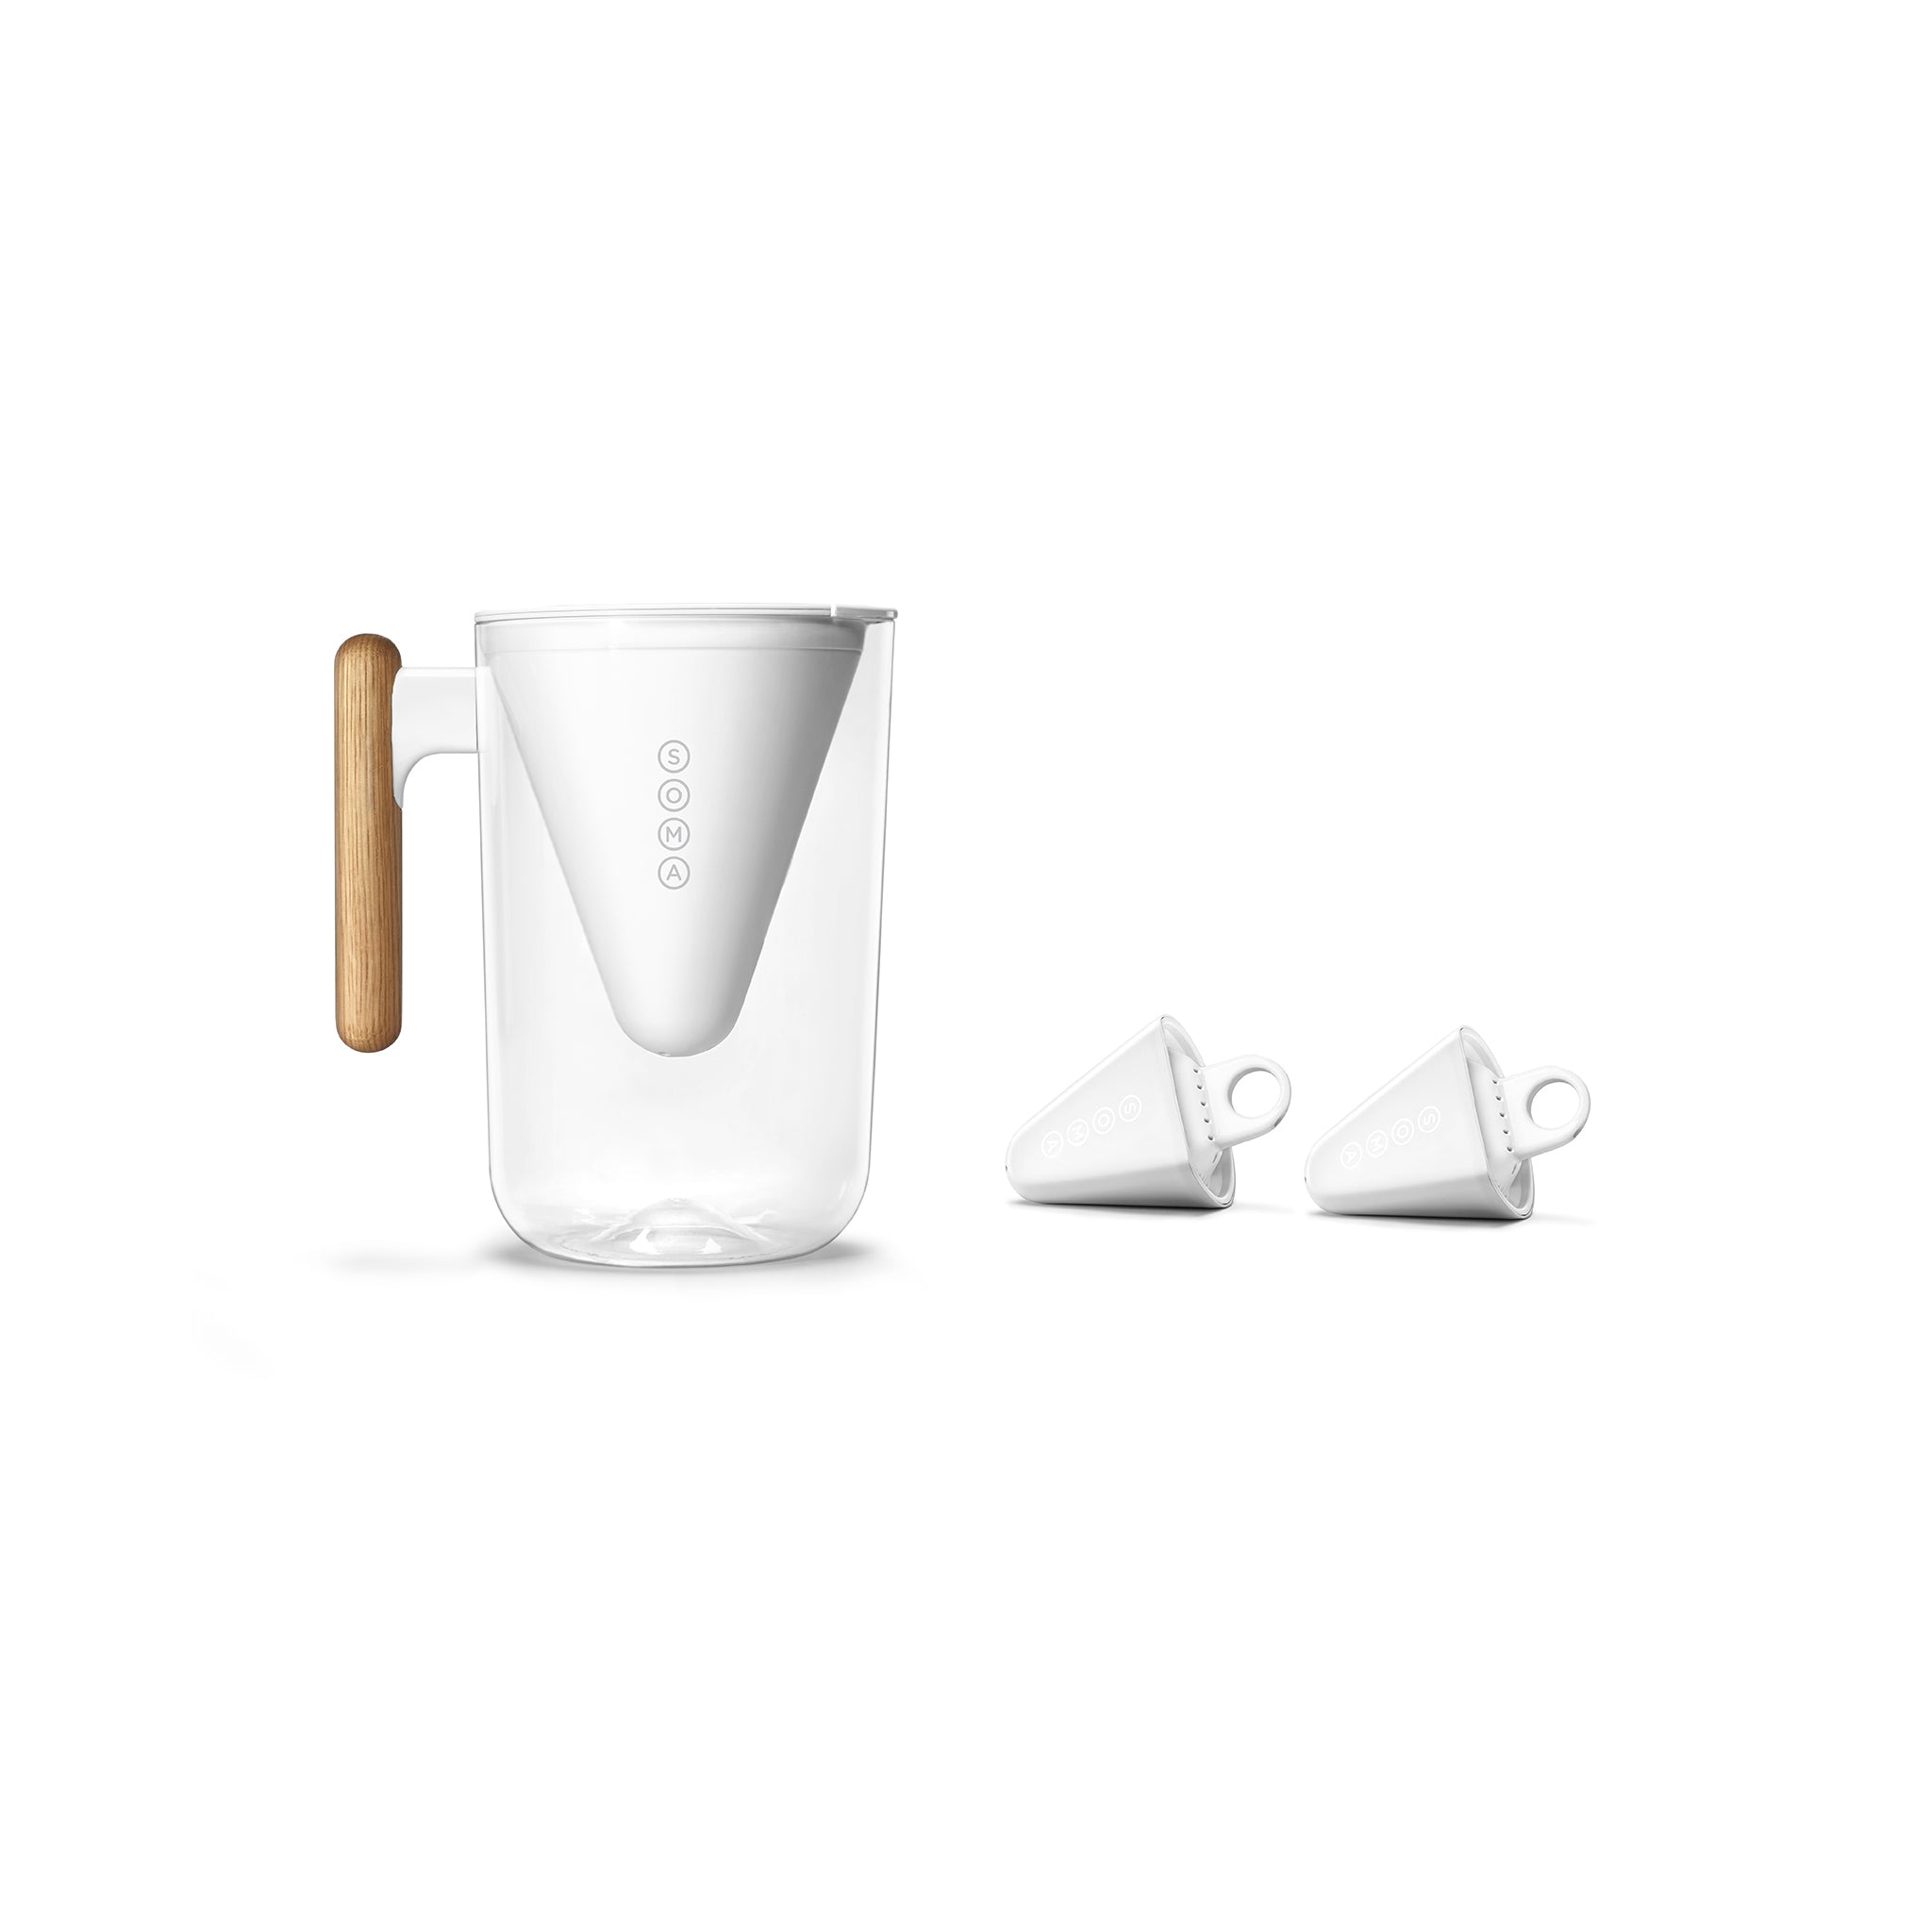 10-Cup Filtered Pitcher & Filters Kit